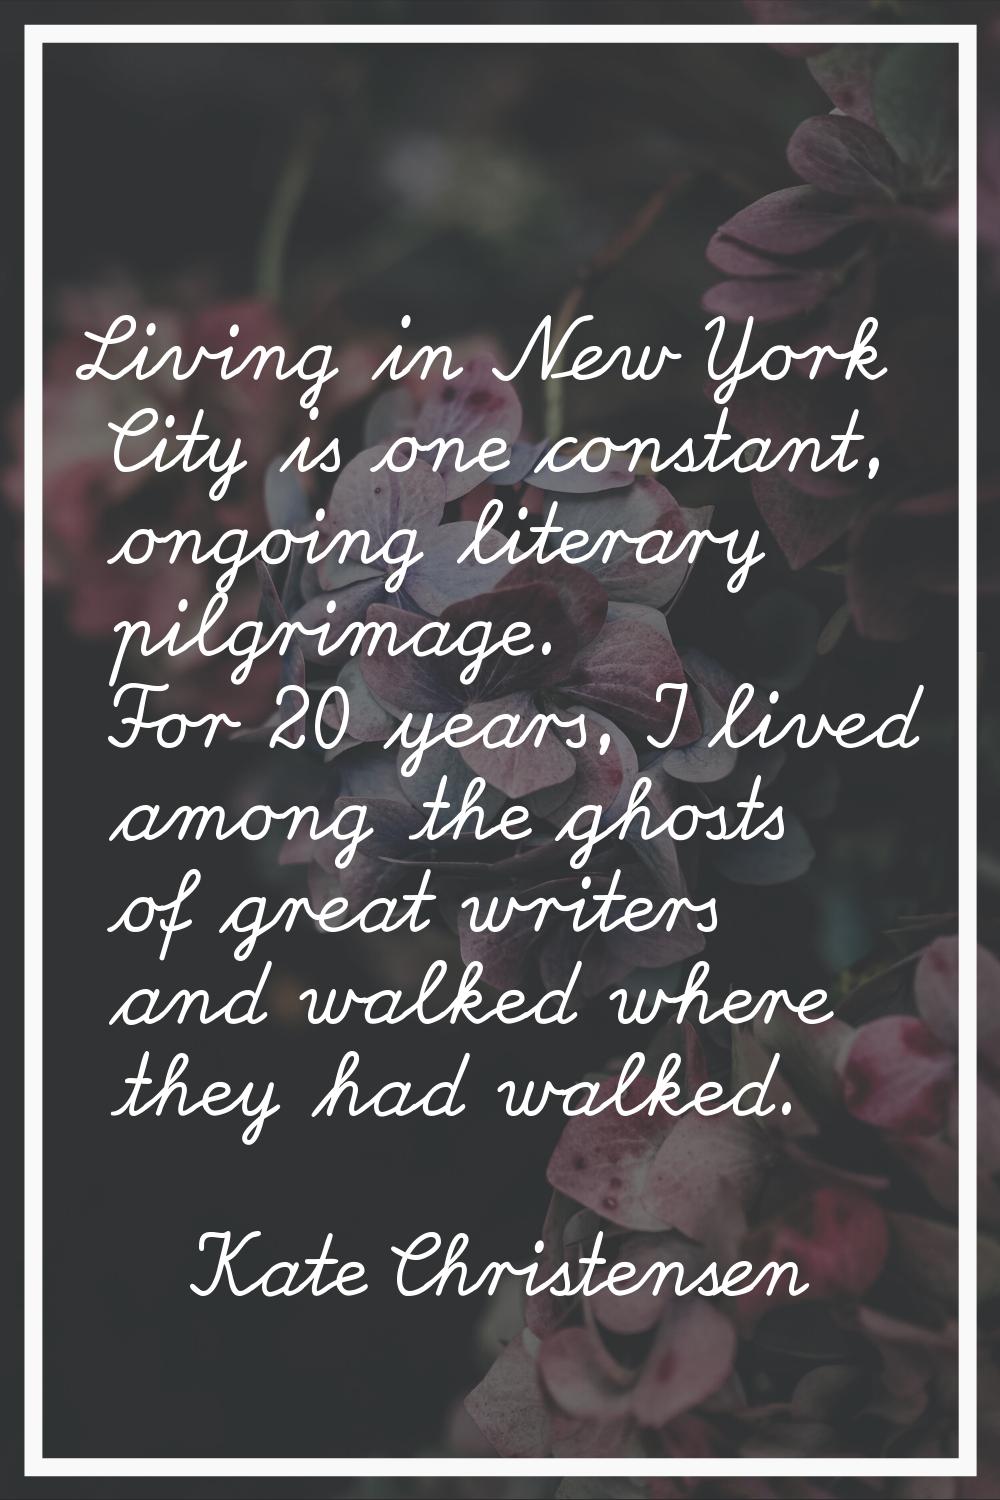 Living in New York City is one constant, ongoing literary pilgrimage. For 20 years, I lived among t